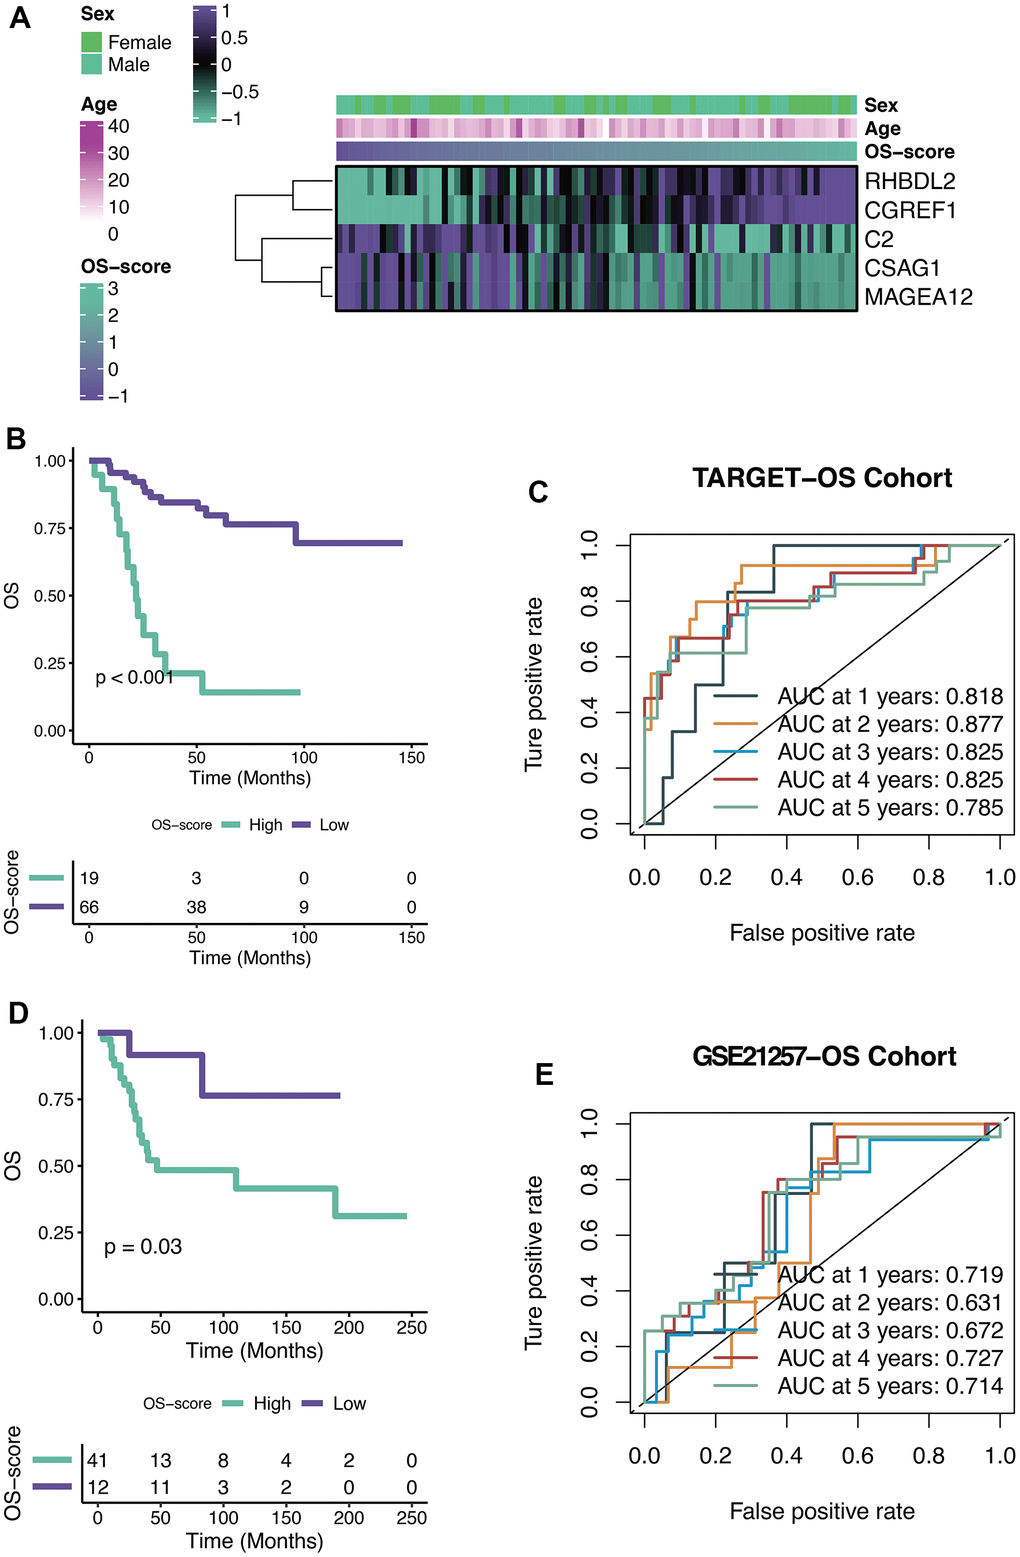 Efficacy of OXS-signature for OS. (A) Heat map showing the relationship between five genes (RHBDL2, CGREF1, C2, CSAG1, and MAGEA12) in the OXS-signature and OS-scores distribution and its clinical characteristics; (B) Kaplan-Meier survival curve showing survival probability of high-OS-score or low-OS-score subgroups for TARGET-OS cohort, with the green curve representing the group with higher OS-scores, and the purple curve representing the group with lower OS-scores; (C) The 1-year, 2-year, 3-year, 4-year, and 5-year survival ROC curves predicted by the OXS-signature for TARGET-OS cohort, with curves in different colors referring to the AUC for different years; (D) Kaplan-Meier survival curve showing survival probability of high-OS-score or low-OS-score subgroups for GSE21257-OS cohort, with the green curve indicating the group with higher OS-scores, and the purple curve indicating the group with lower OS-scores; (E) The 1-year, 2-year, 3-year, 4-year, and 5-year survival ROC curves predicted by the OXS-signature for GSE21257-OS cohort, with curves in different colors representing the AUC for different years.